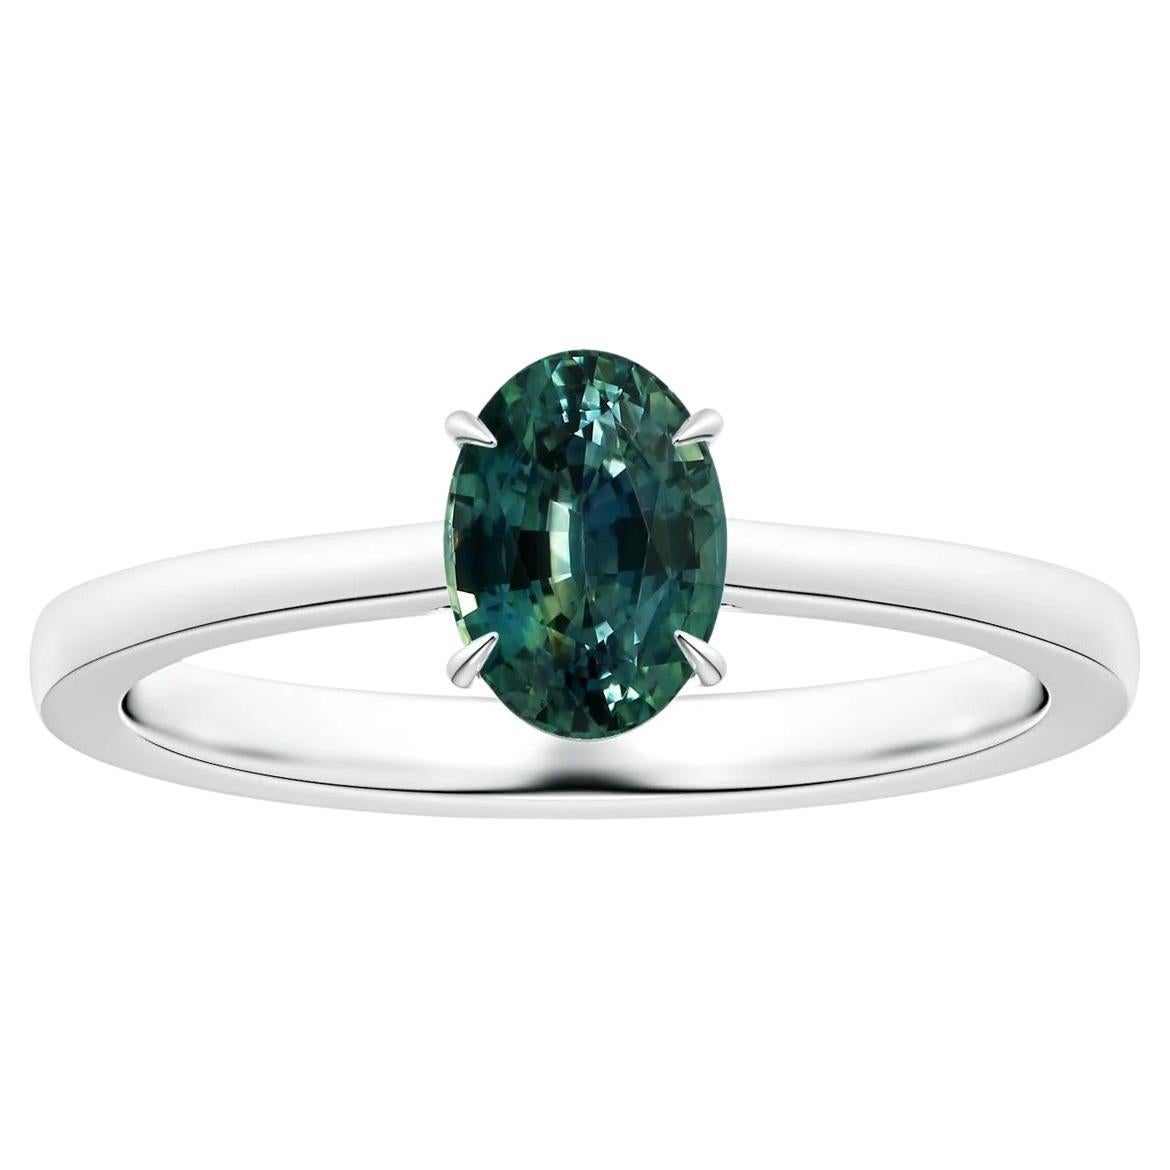 ANGARA GIA Certified Solitaire Teal Sapphire Ring in Platinum